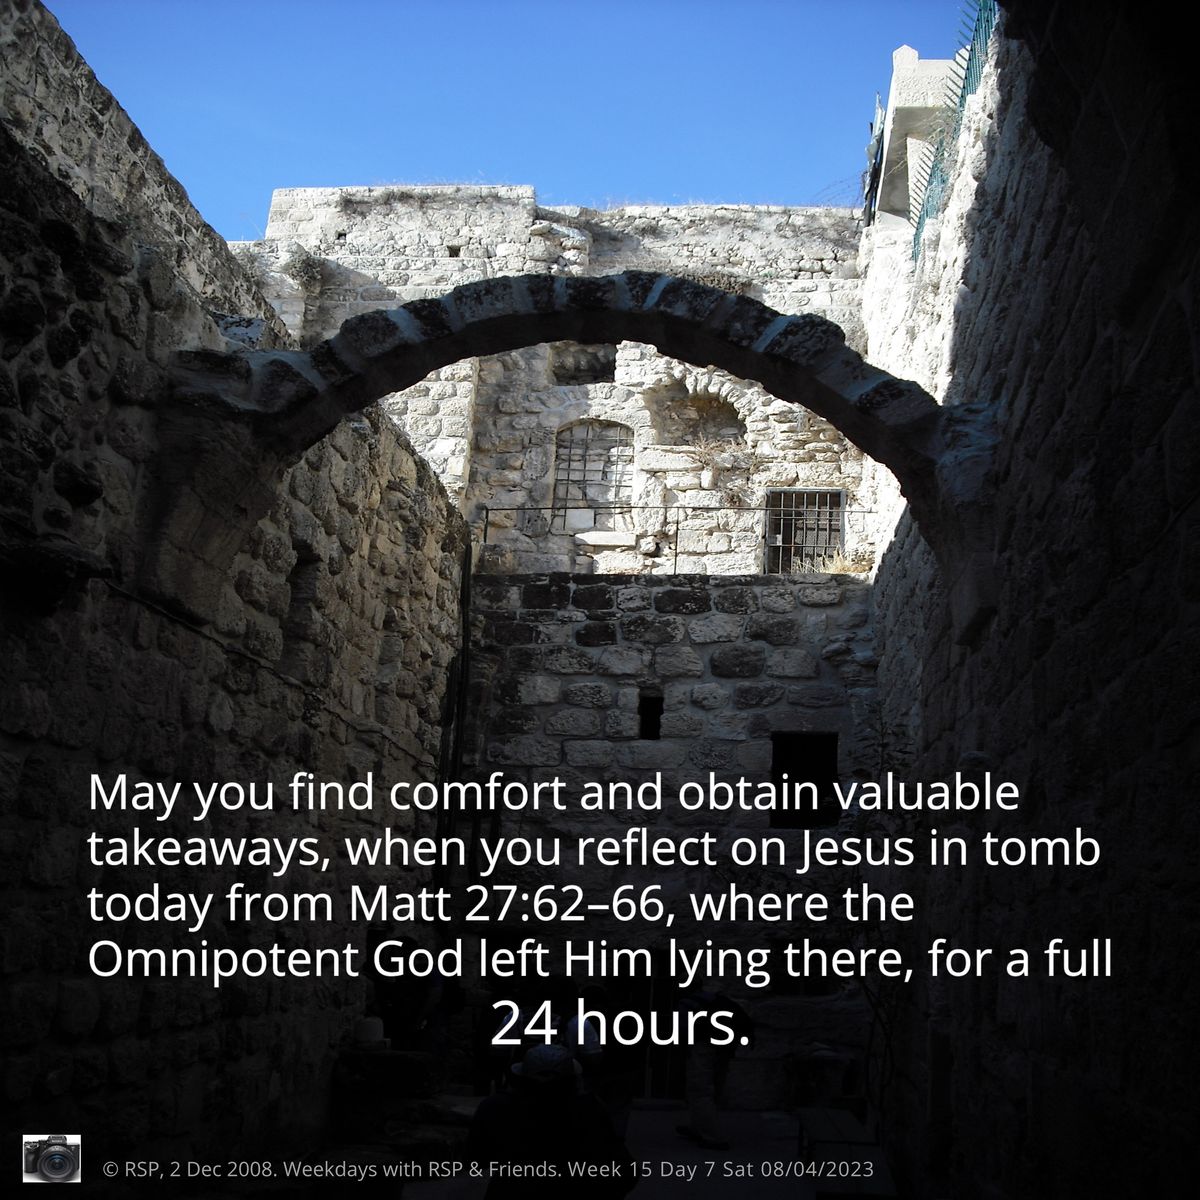 Day 7: What happened between Good Friday and Easter?